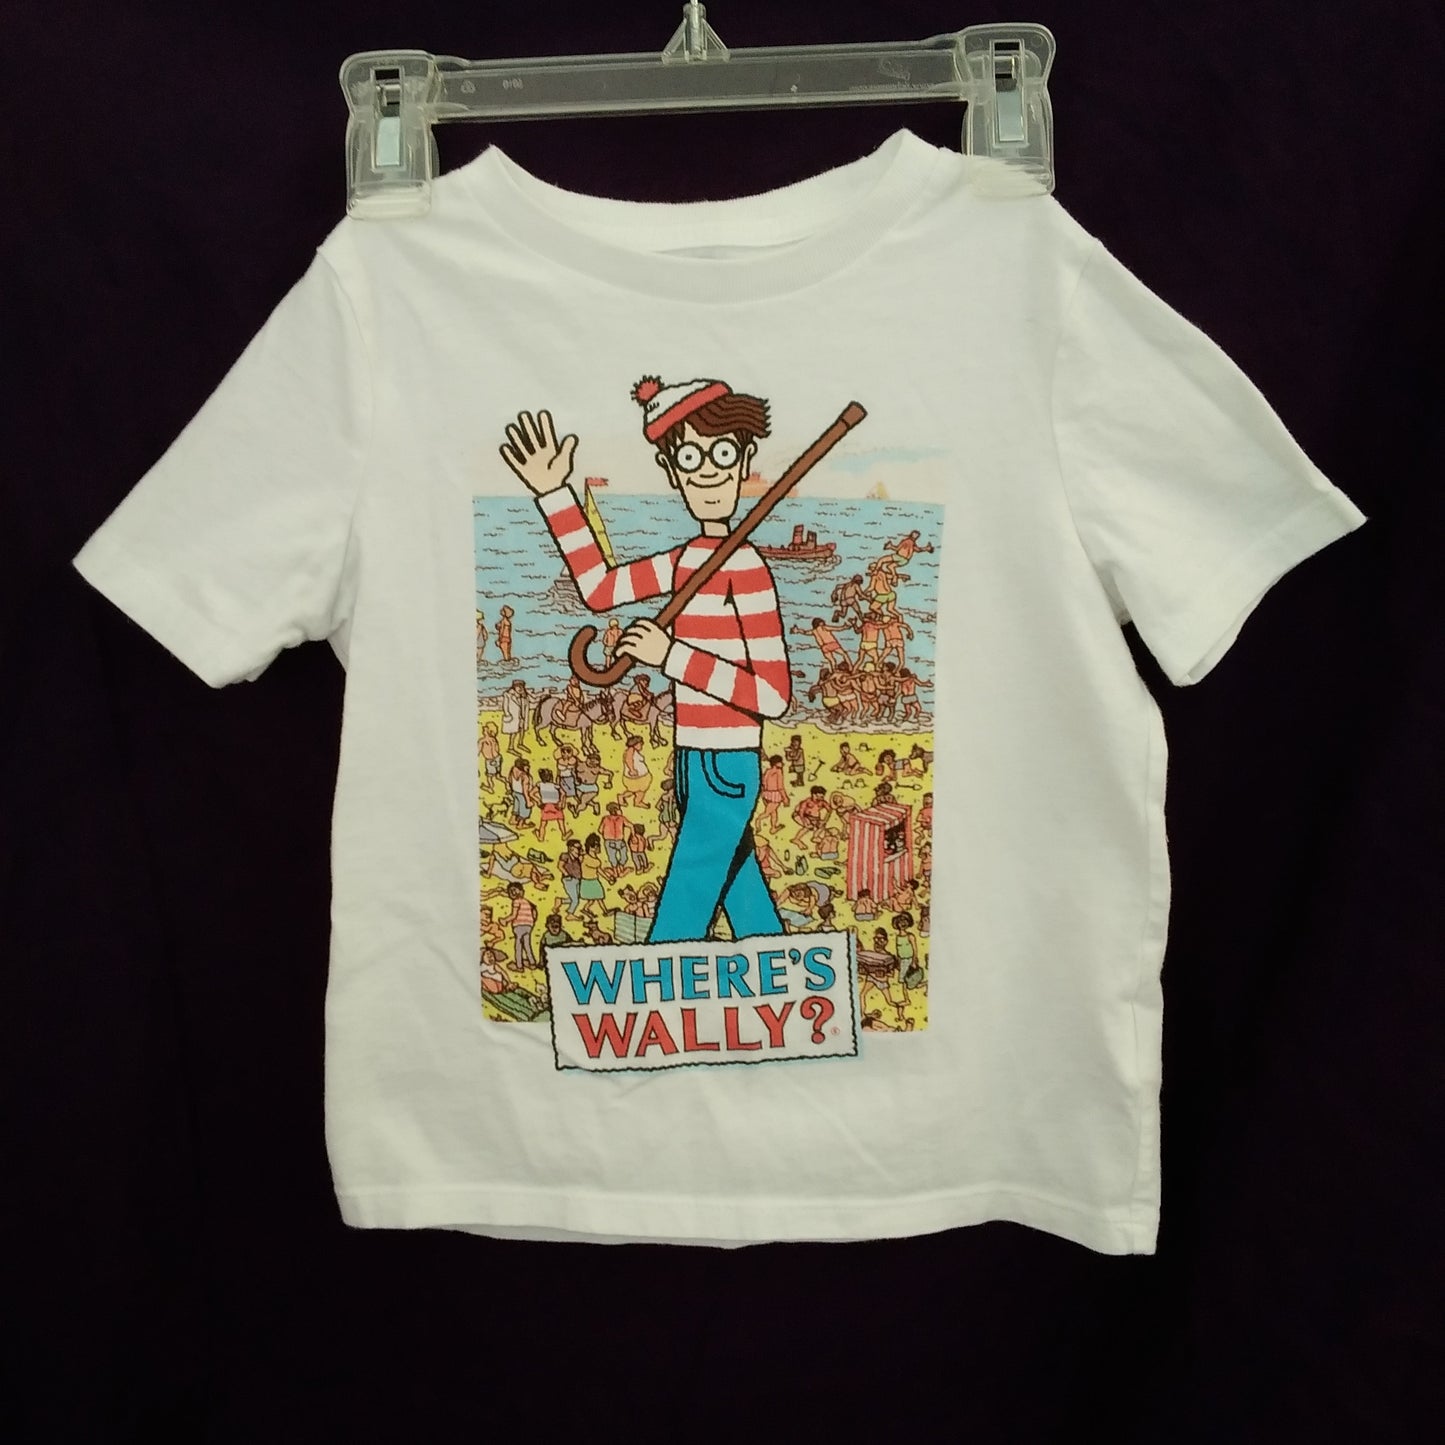 Gap Kid's Graphic Tee - Where's Wally - Size: XS